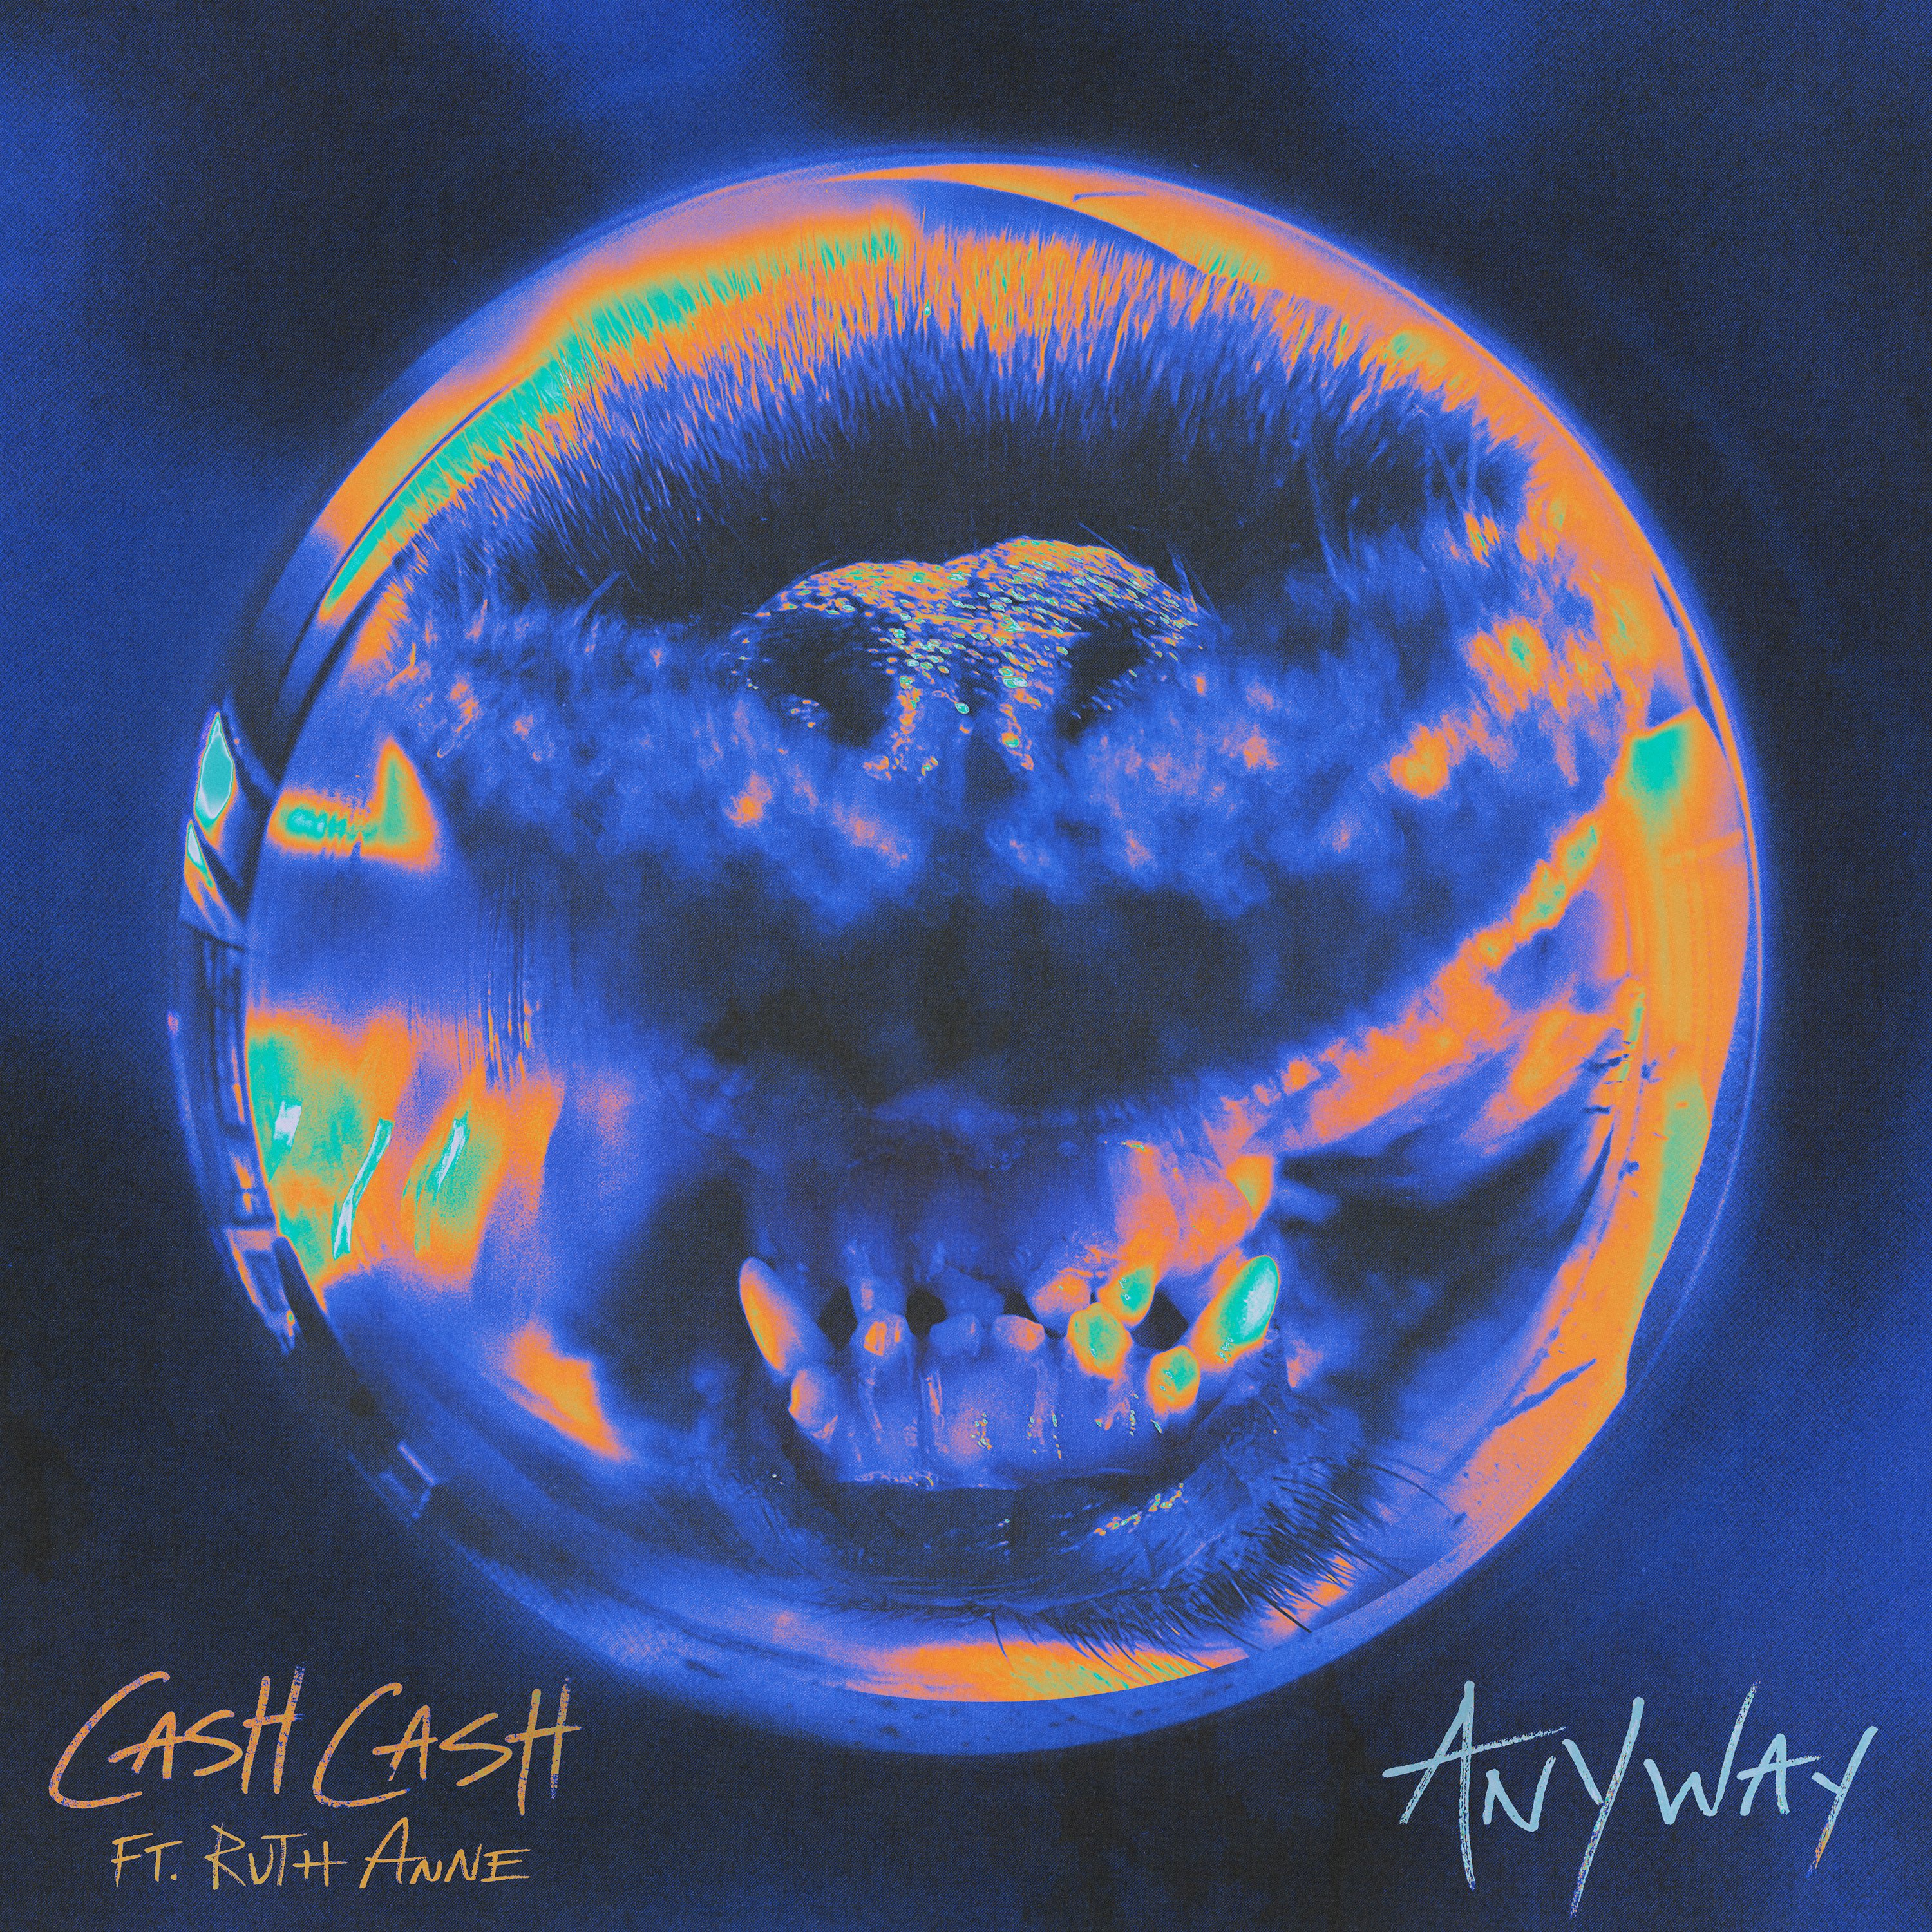 Cash Cash featuring RuthAnne — Anyway cover artwork